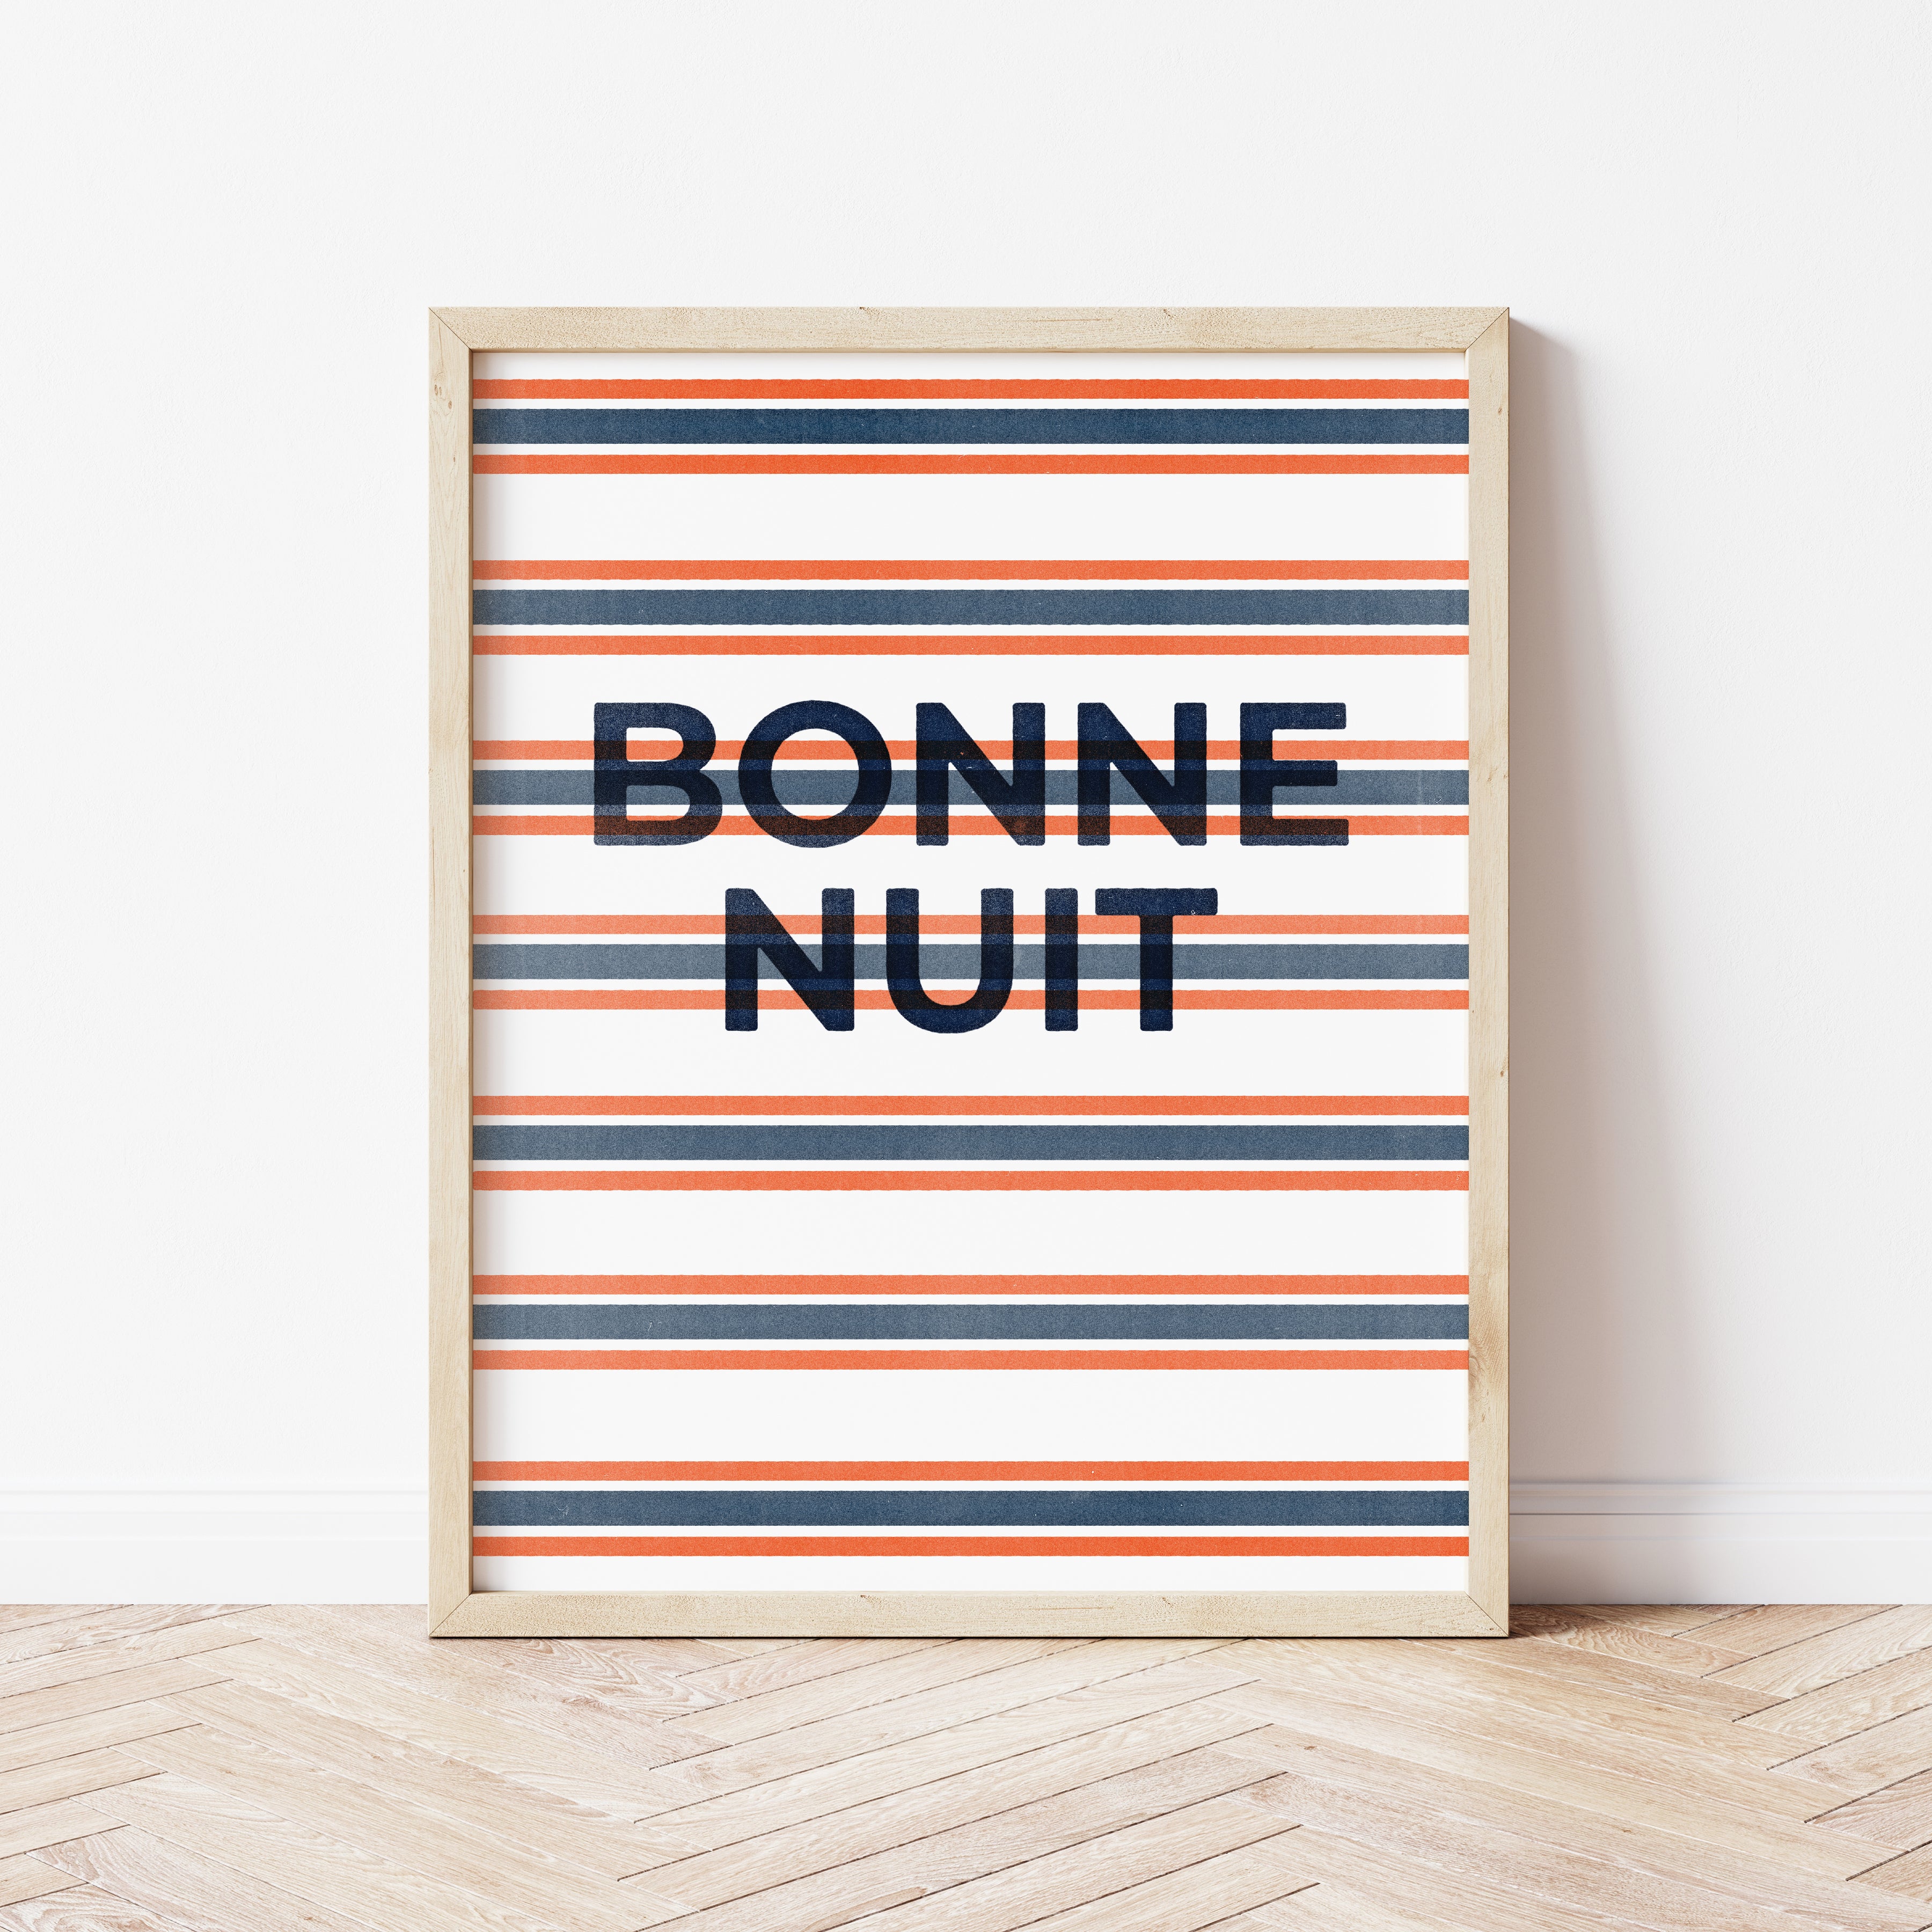 Bonne Nuit' French Print by Gert & Co